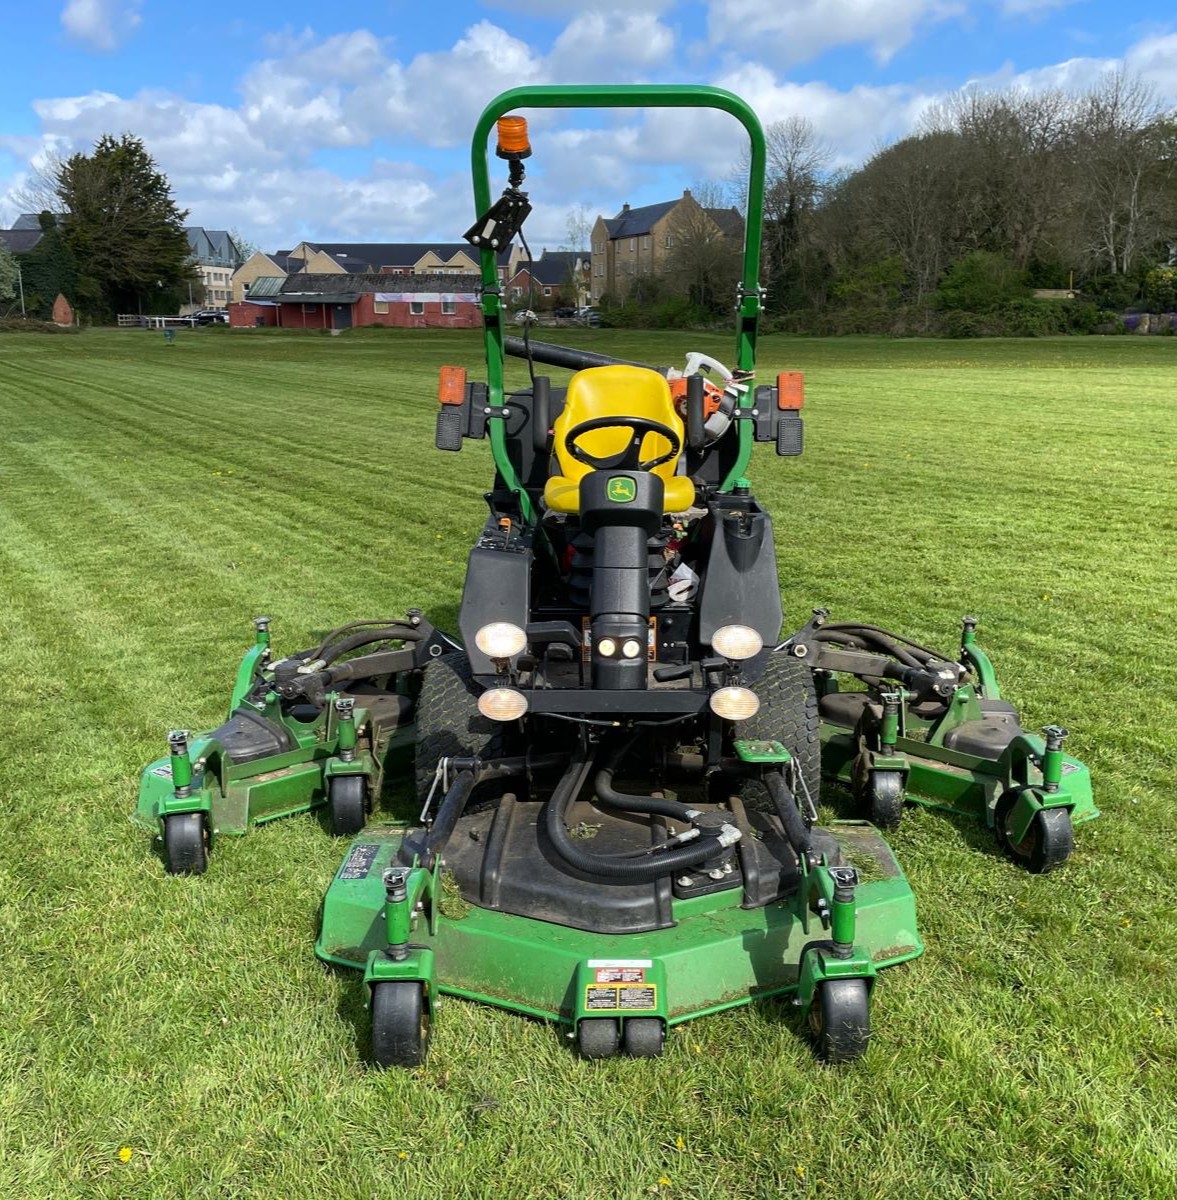 Despite the wet weather, the Environmental Services team are progressing with the grass cutting. The recent sunny weather means the ground is slightly drier so the heavier ride-on mowers can be used on larger areas. The team remain behind schedule but are working hard to catch up